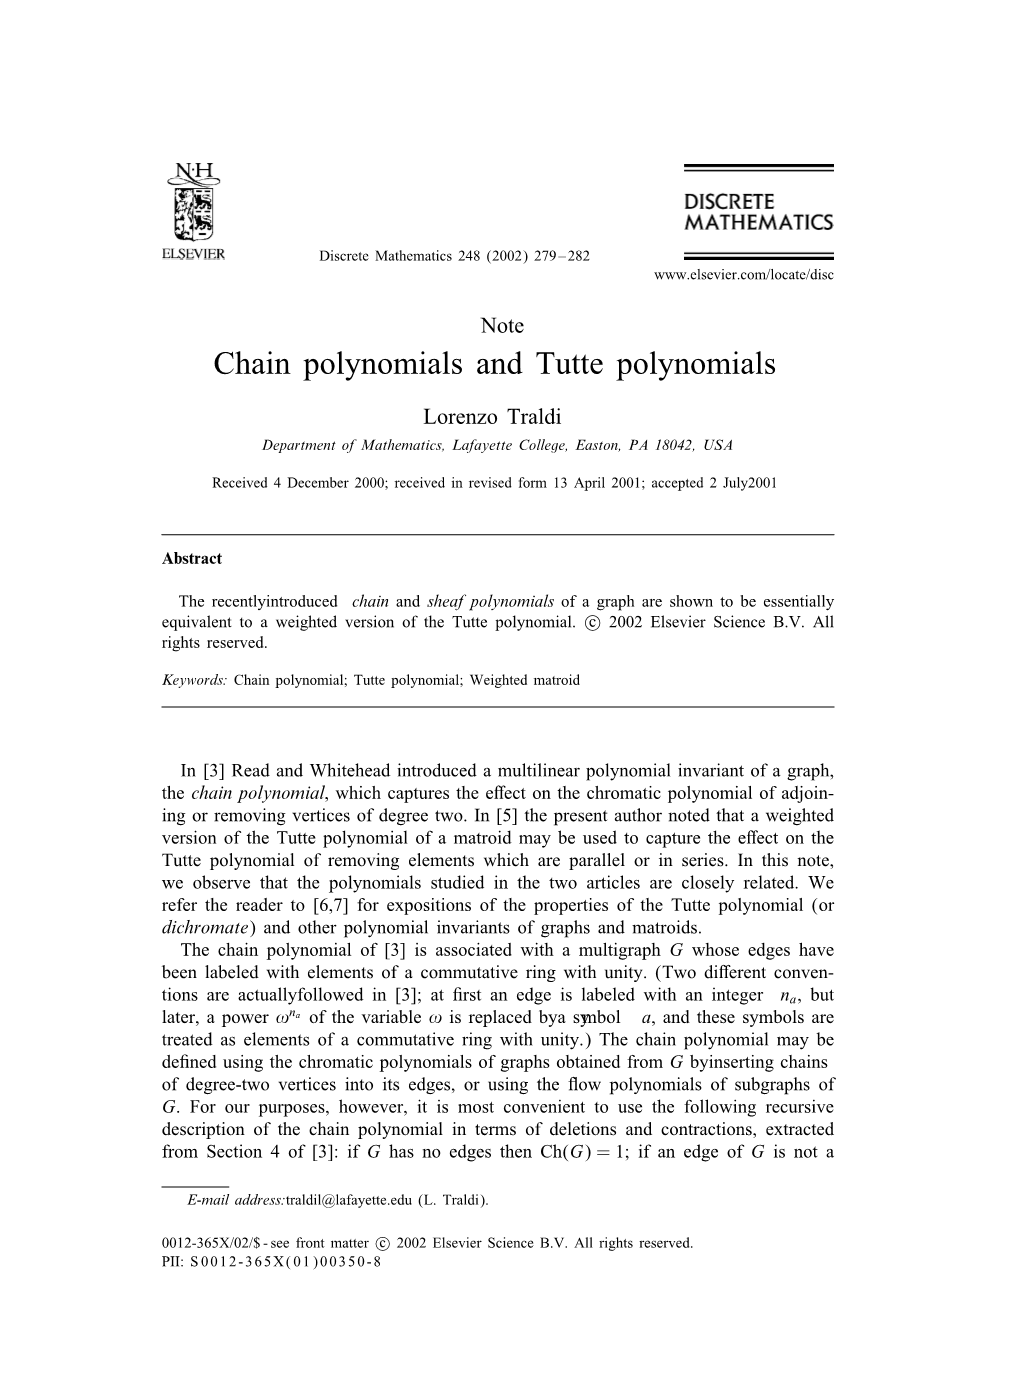 Chain Polynomials and Tutte Polynomials